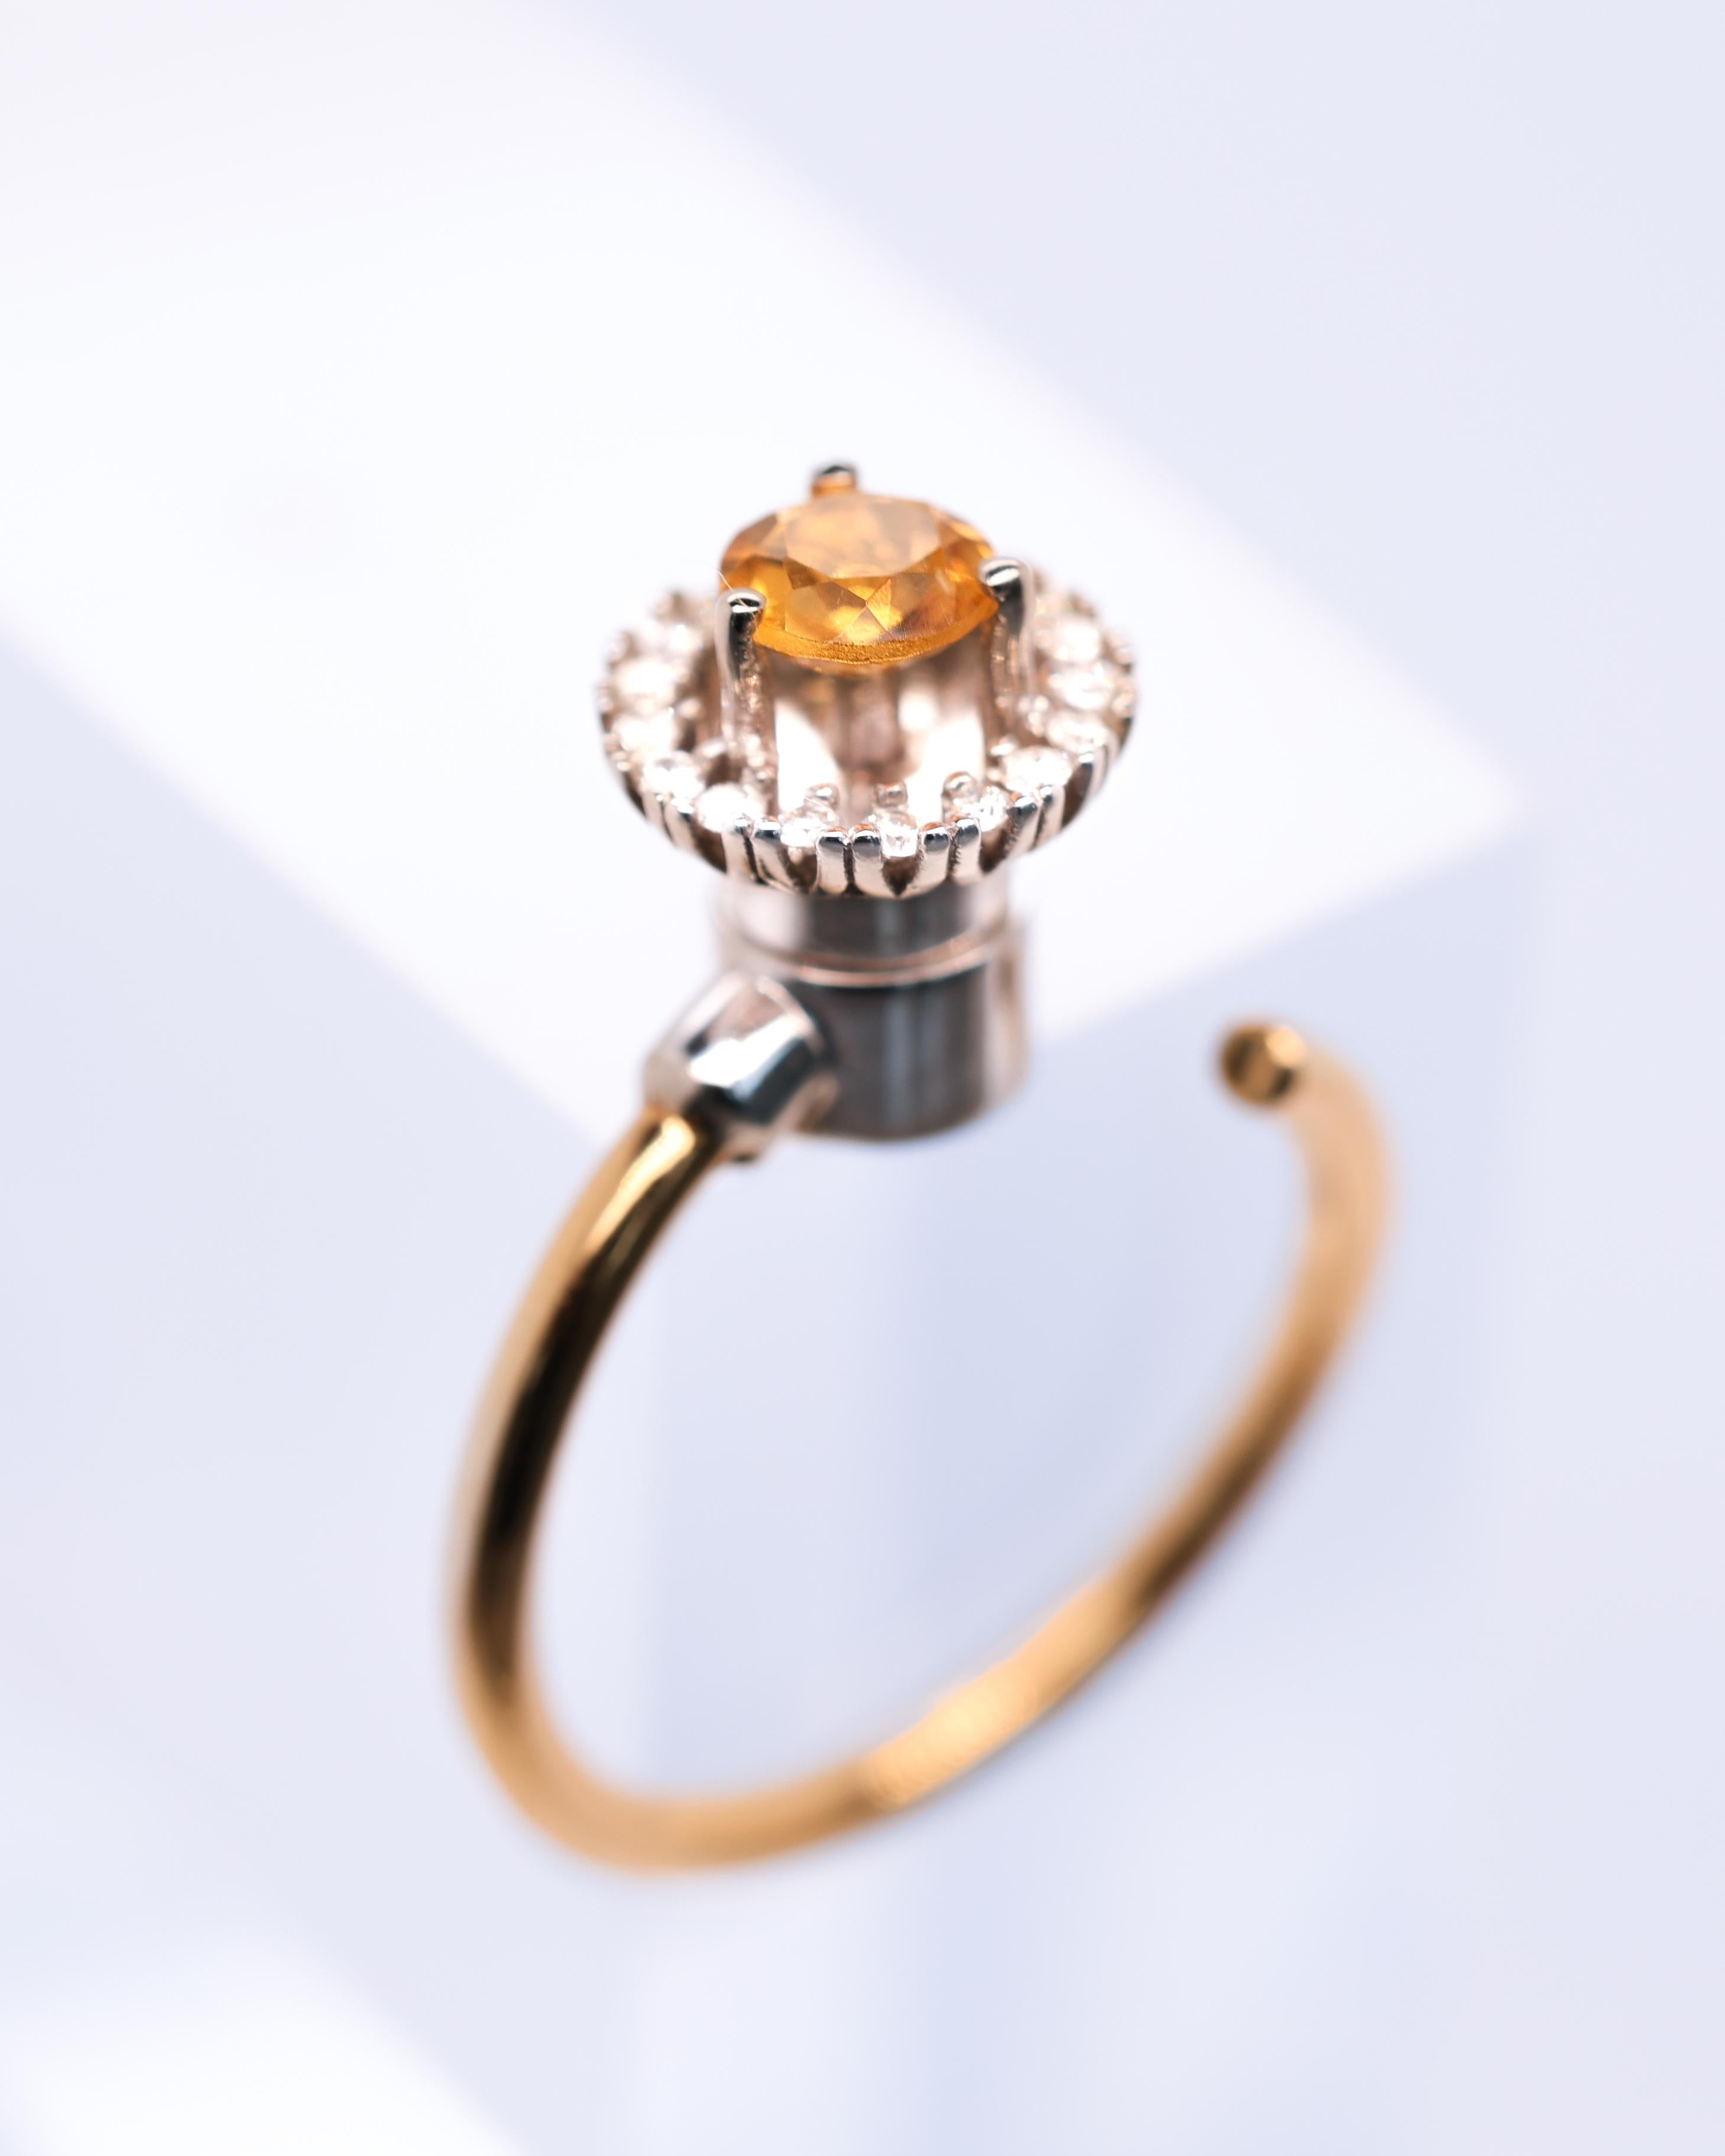 Halo Engagement Ring with Diamonds H/SI (17 units, 1mm Ø) & Citrine Quartz (0.7 ct), brilliant cut in a Golden Yellow & White Ring, 18K 

You can put and take on, the Citrine Quartz with Halo of White Diamonds in White Gold (18K), in the Yellow Gold